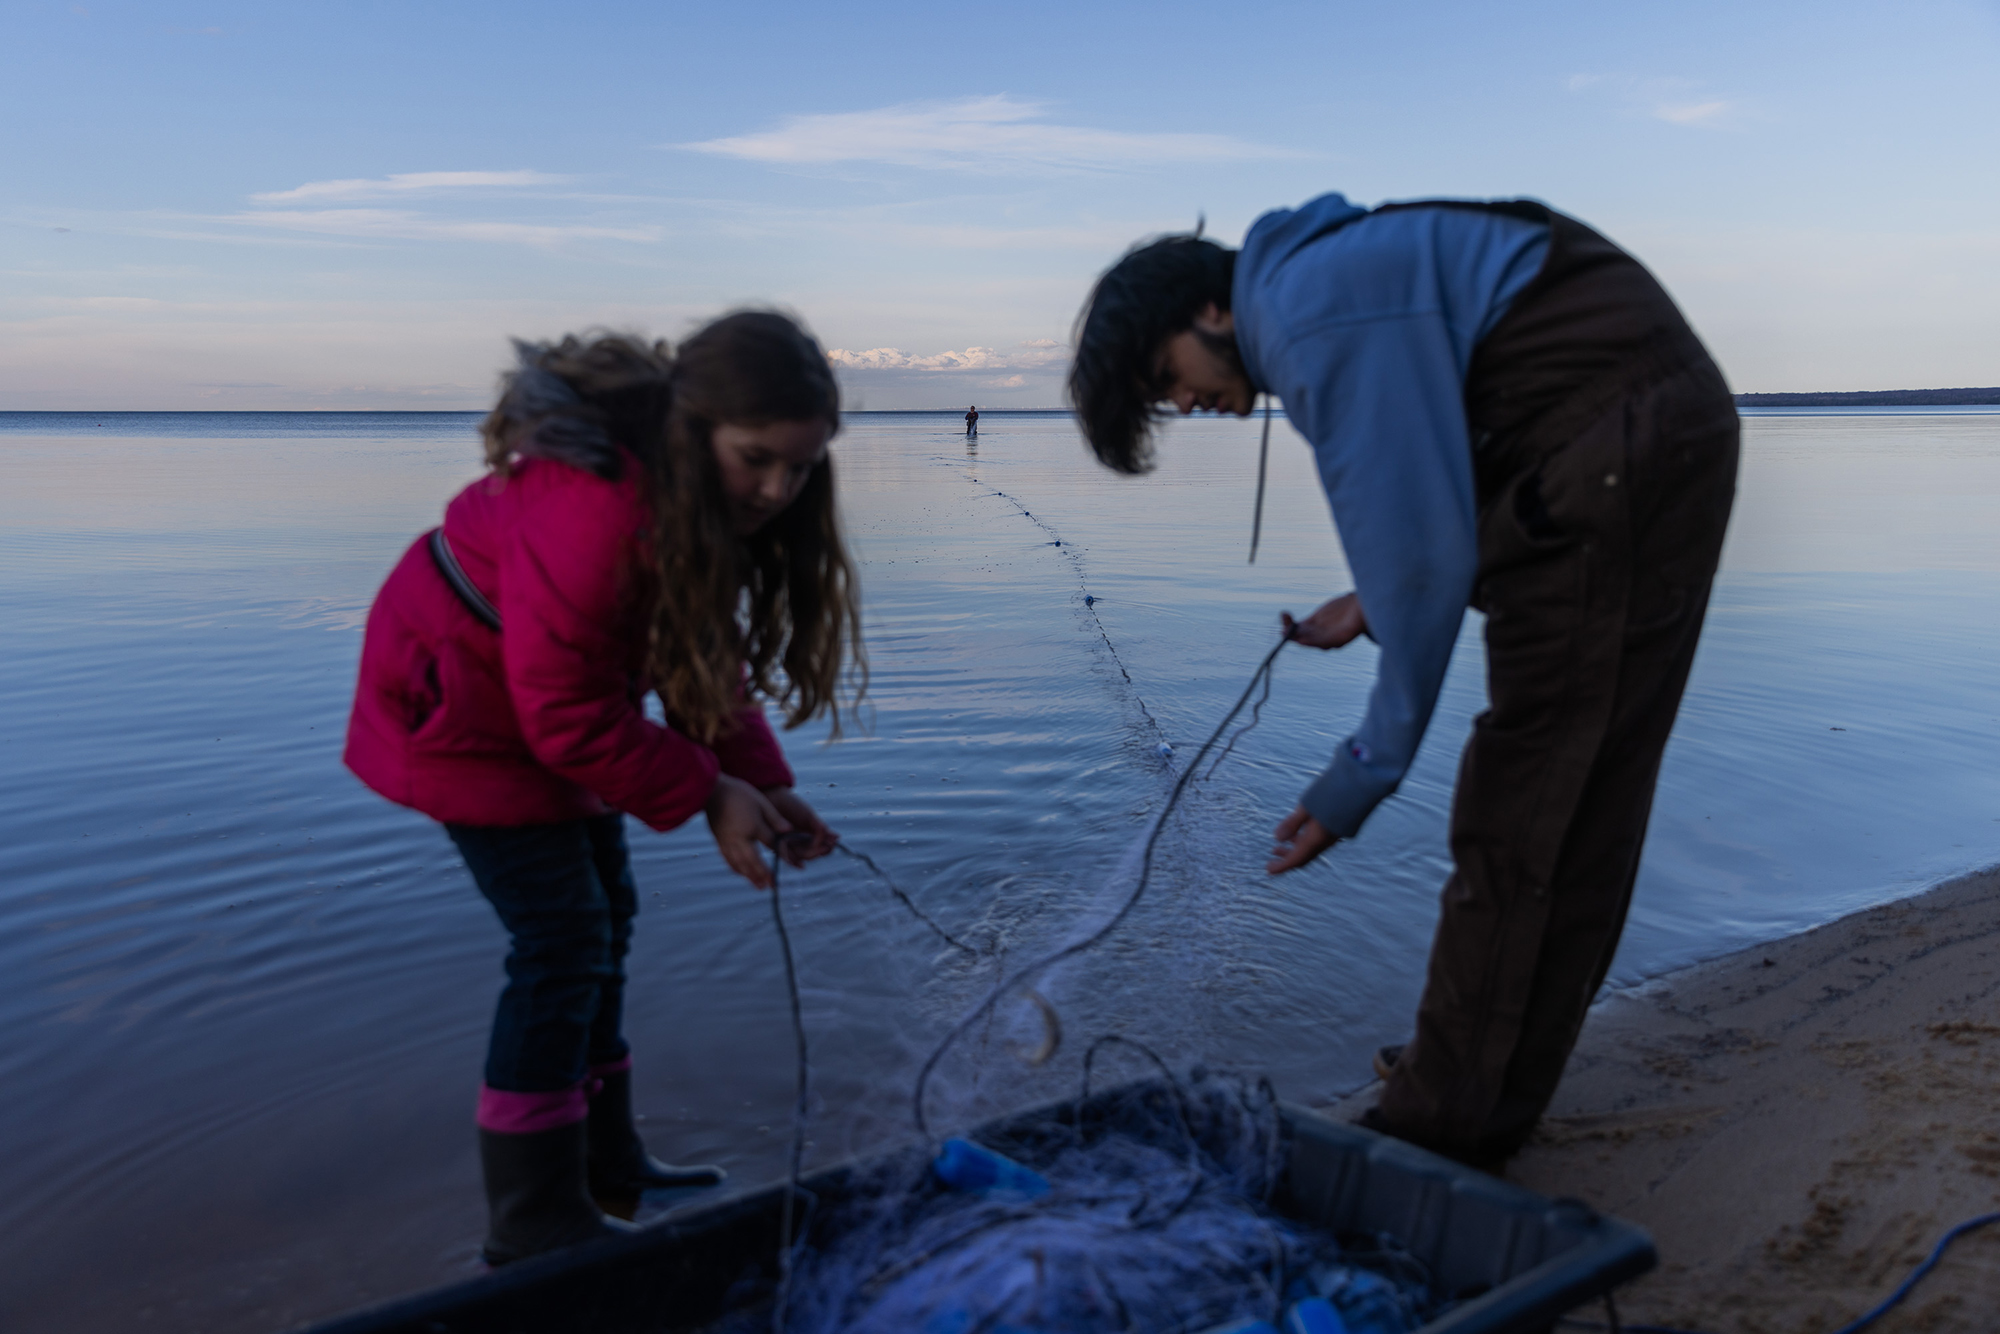 Two young people untangling a fishing net on the shore.